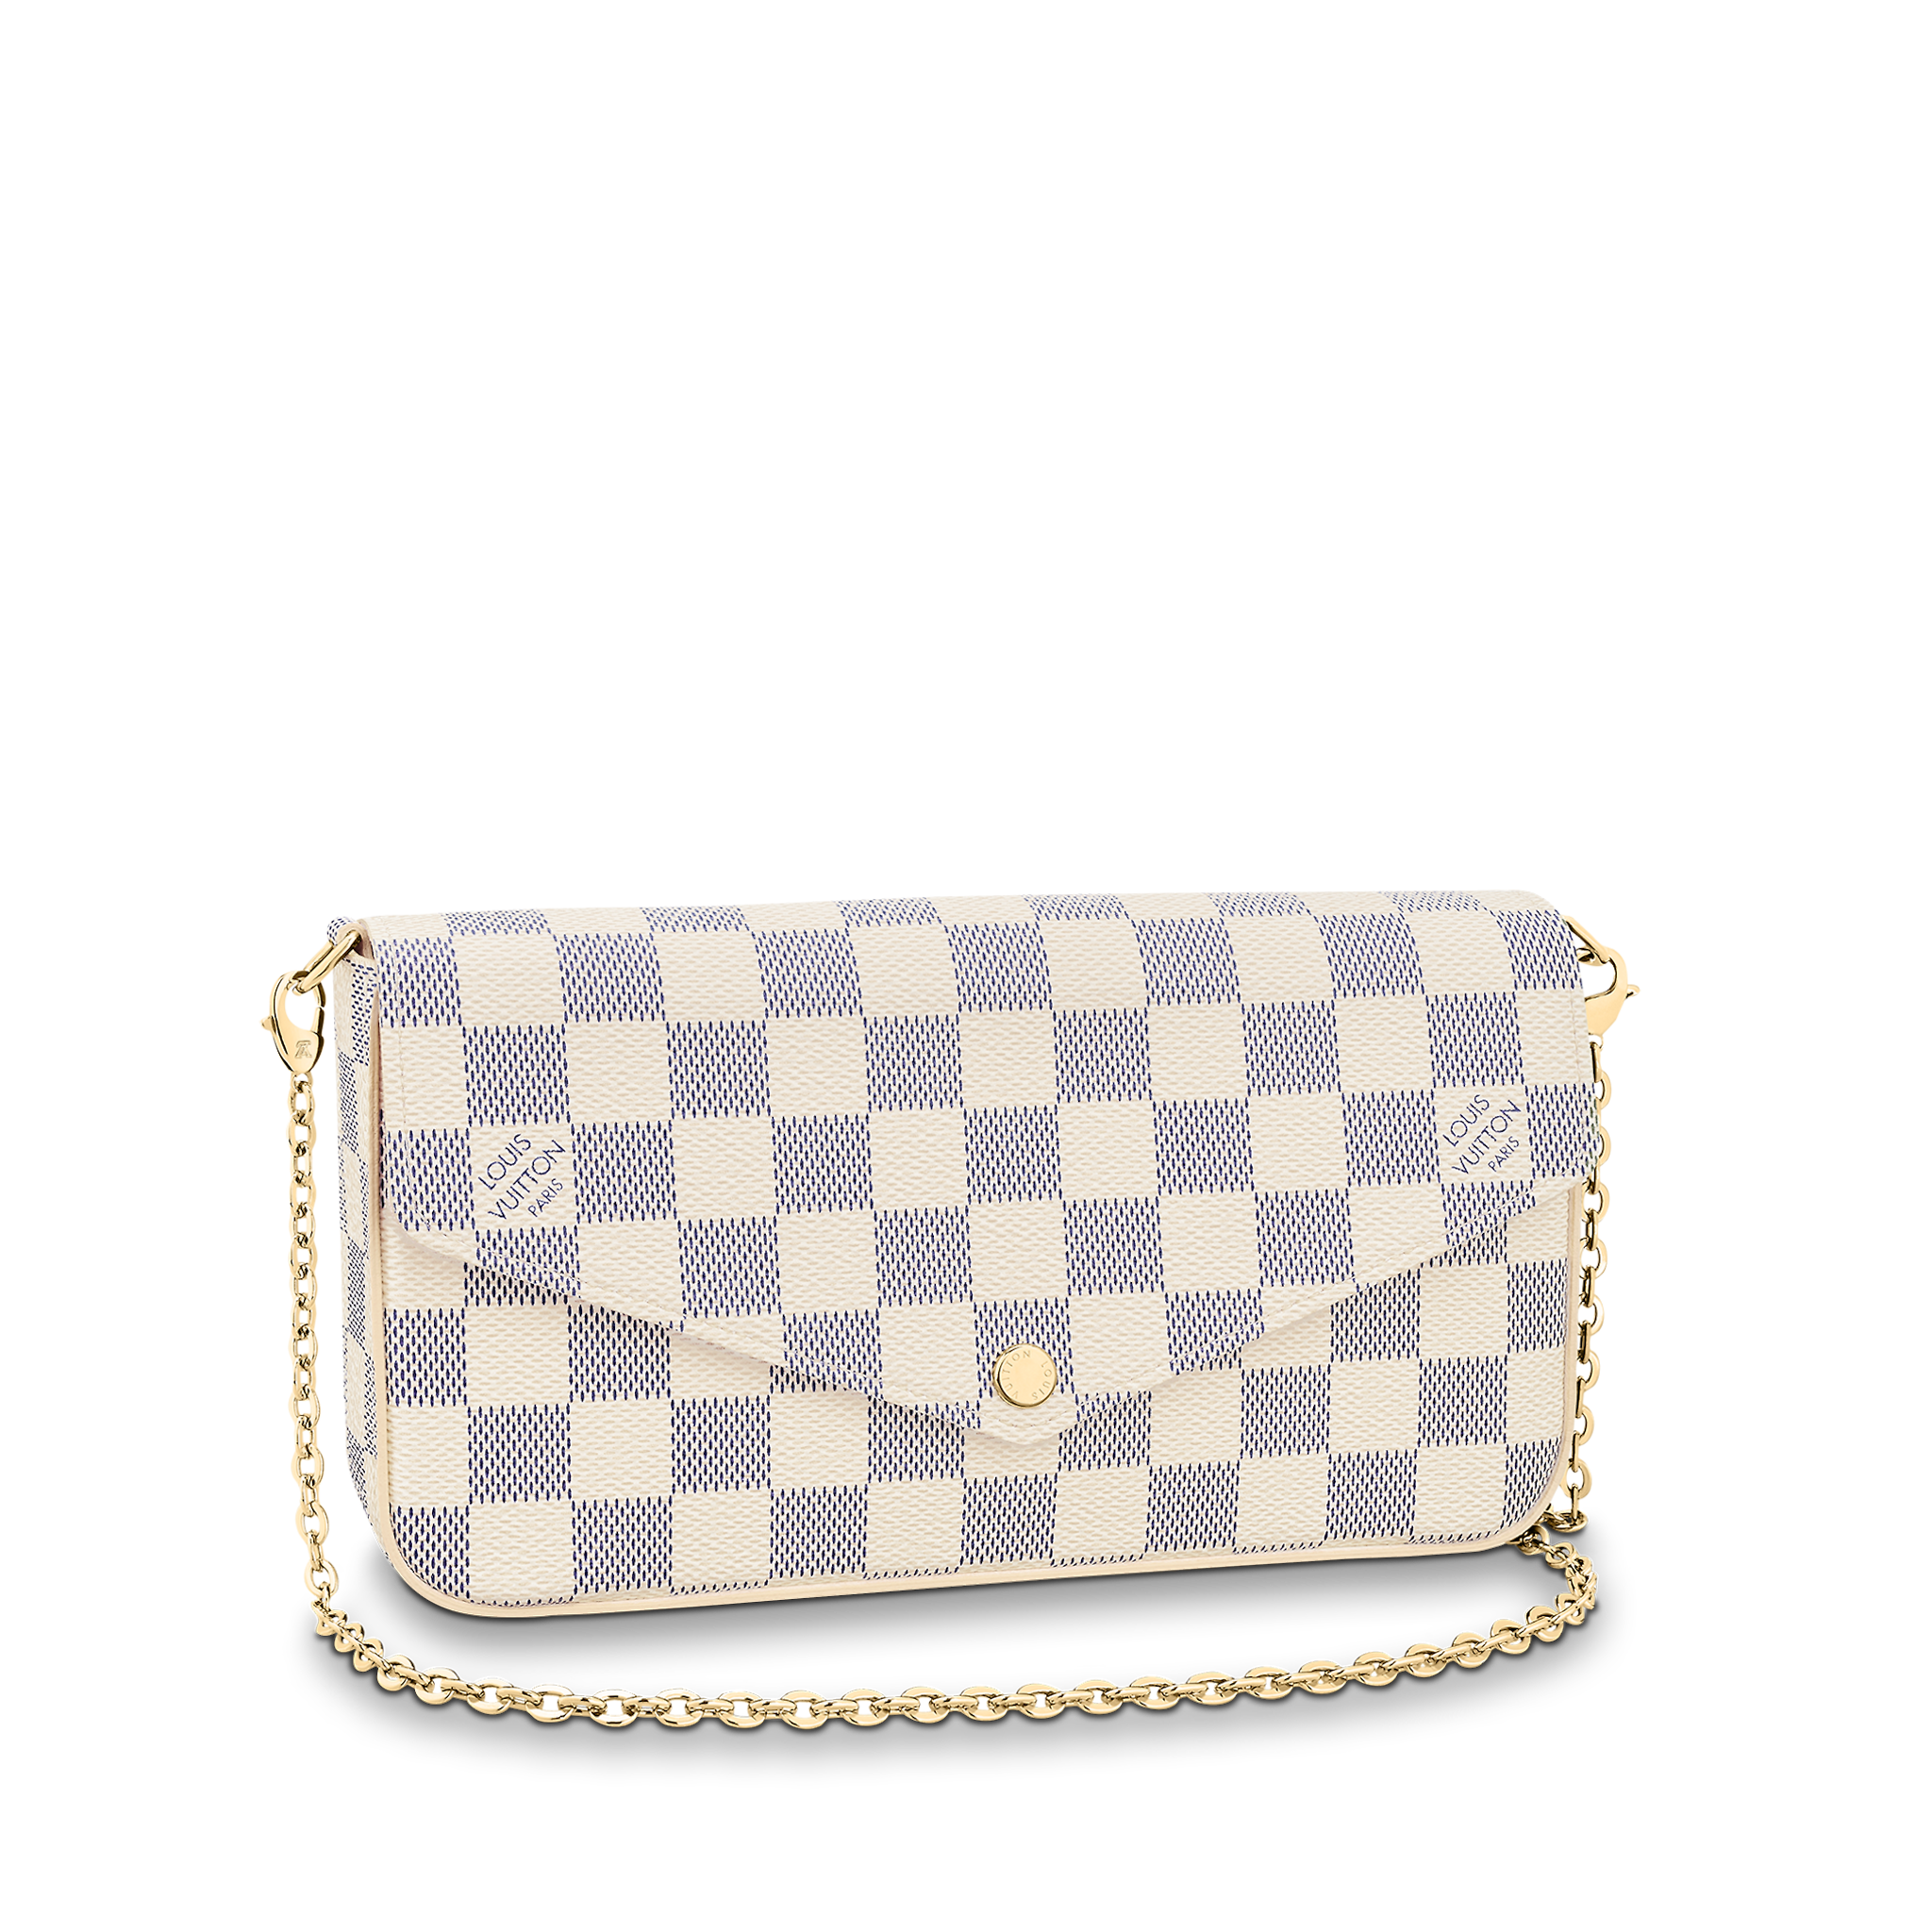 LOUIS VUITTON REVEALS  Should I Keep This Bag (as a Minimalist)? - Easy  Pouch, Felicie 